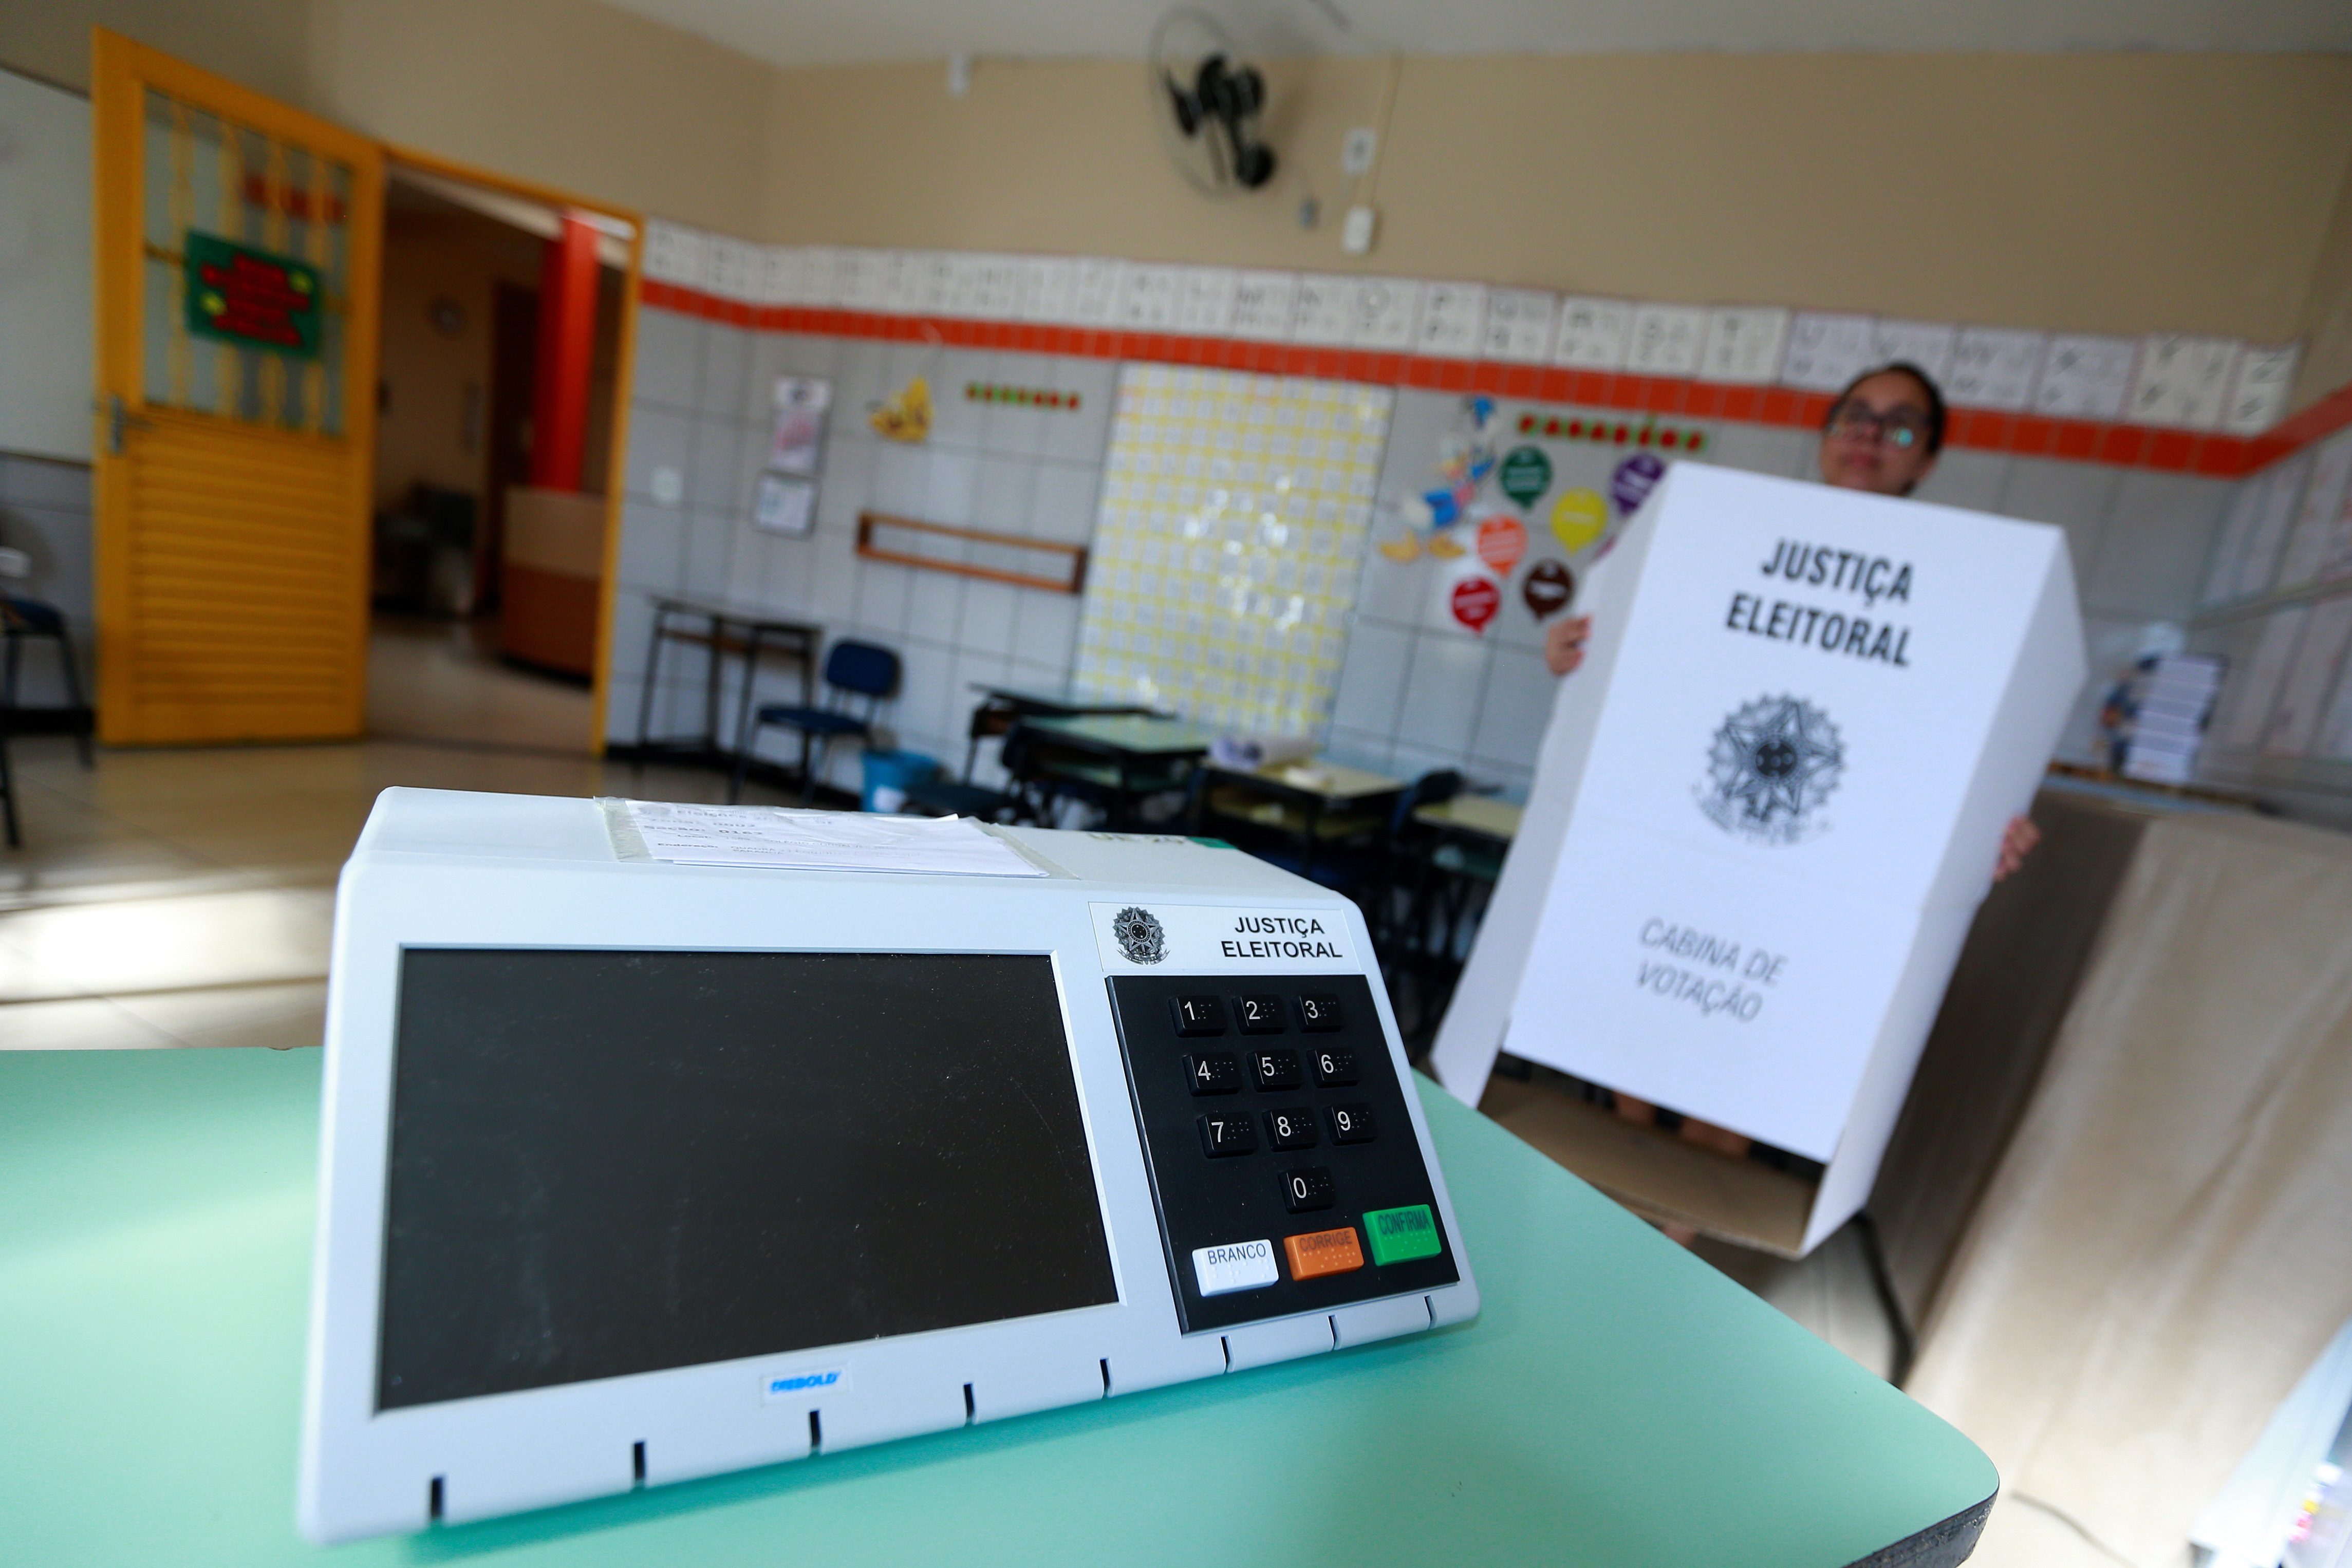 File photo of an electronic ballot box on election day at a school in Brasilia (EFE/Joédson Alves)